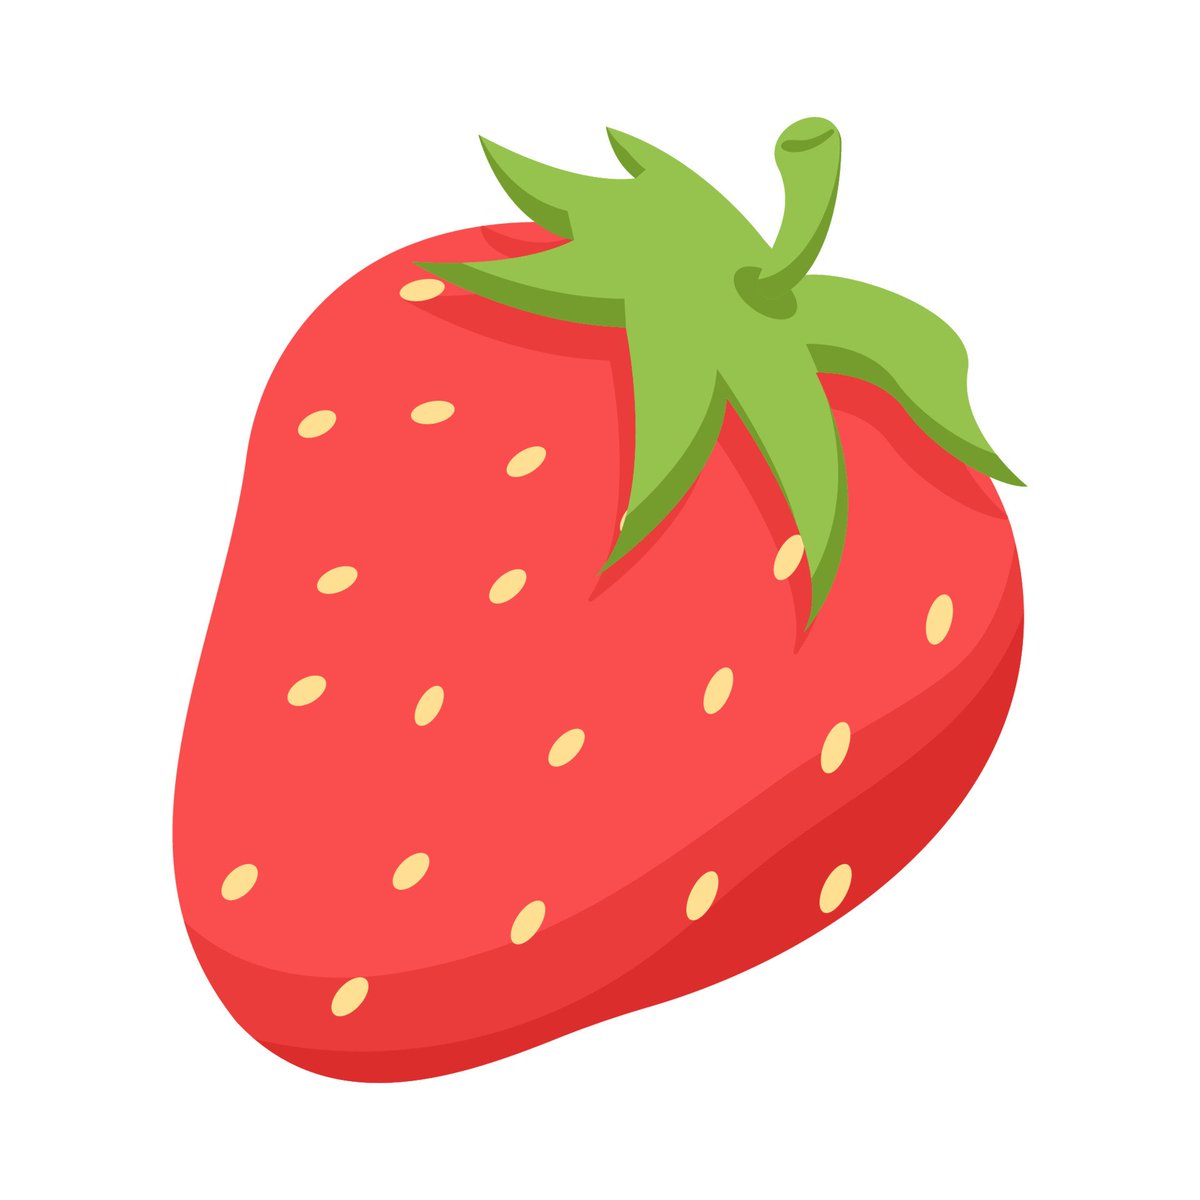 Which shape of the cartoon strawberry y'all like better?